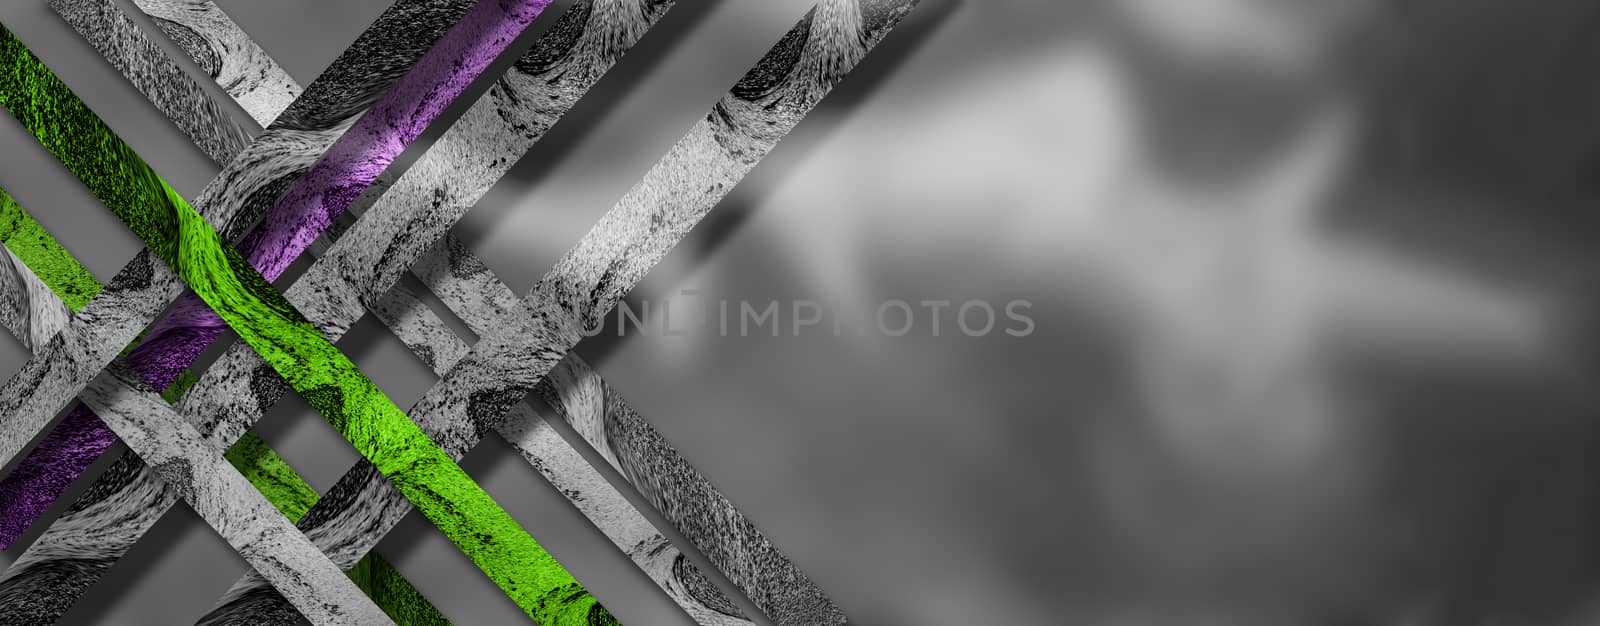 Green, purple and gray lines on silver background. Copy Space by PeterHofstetter